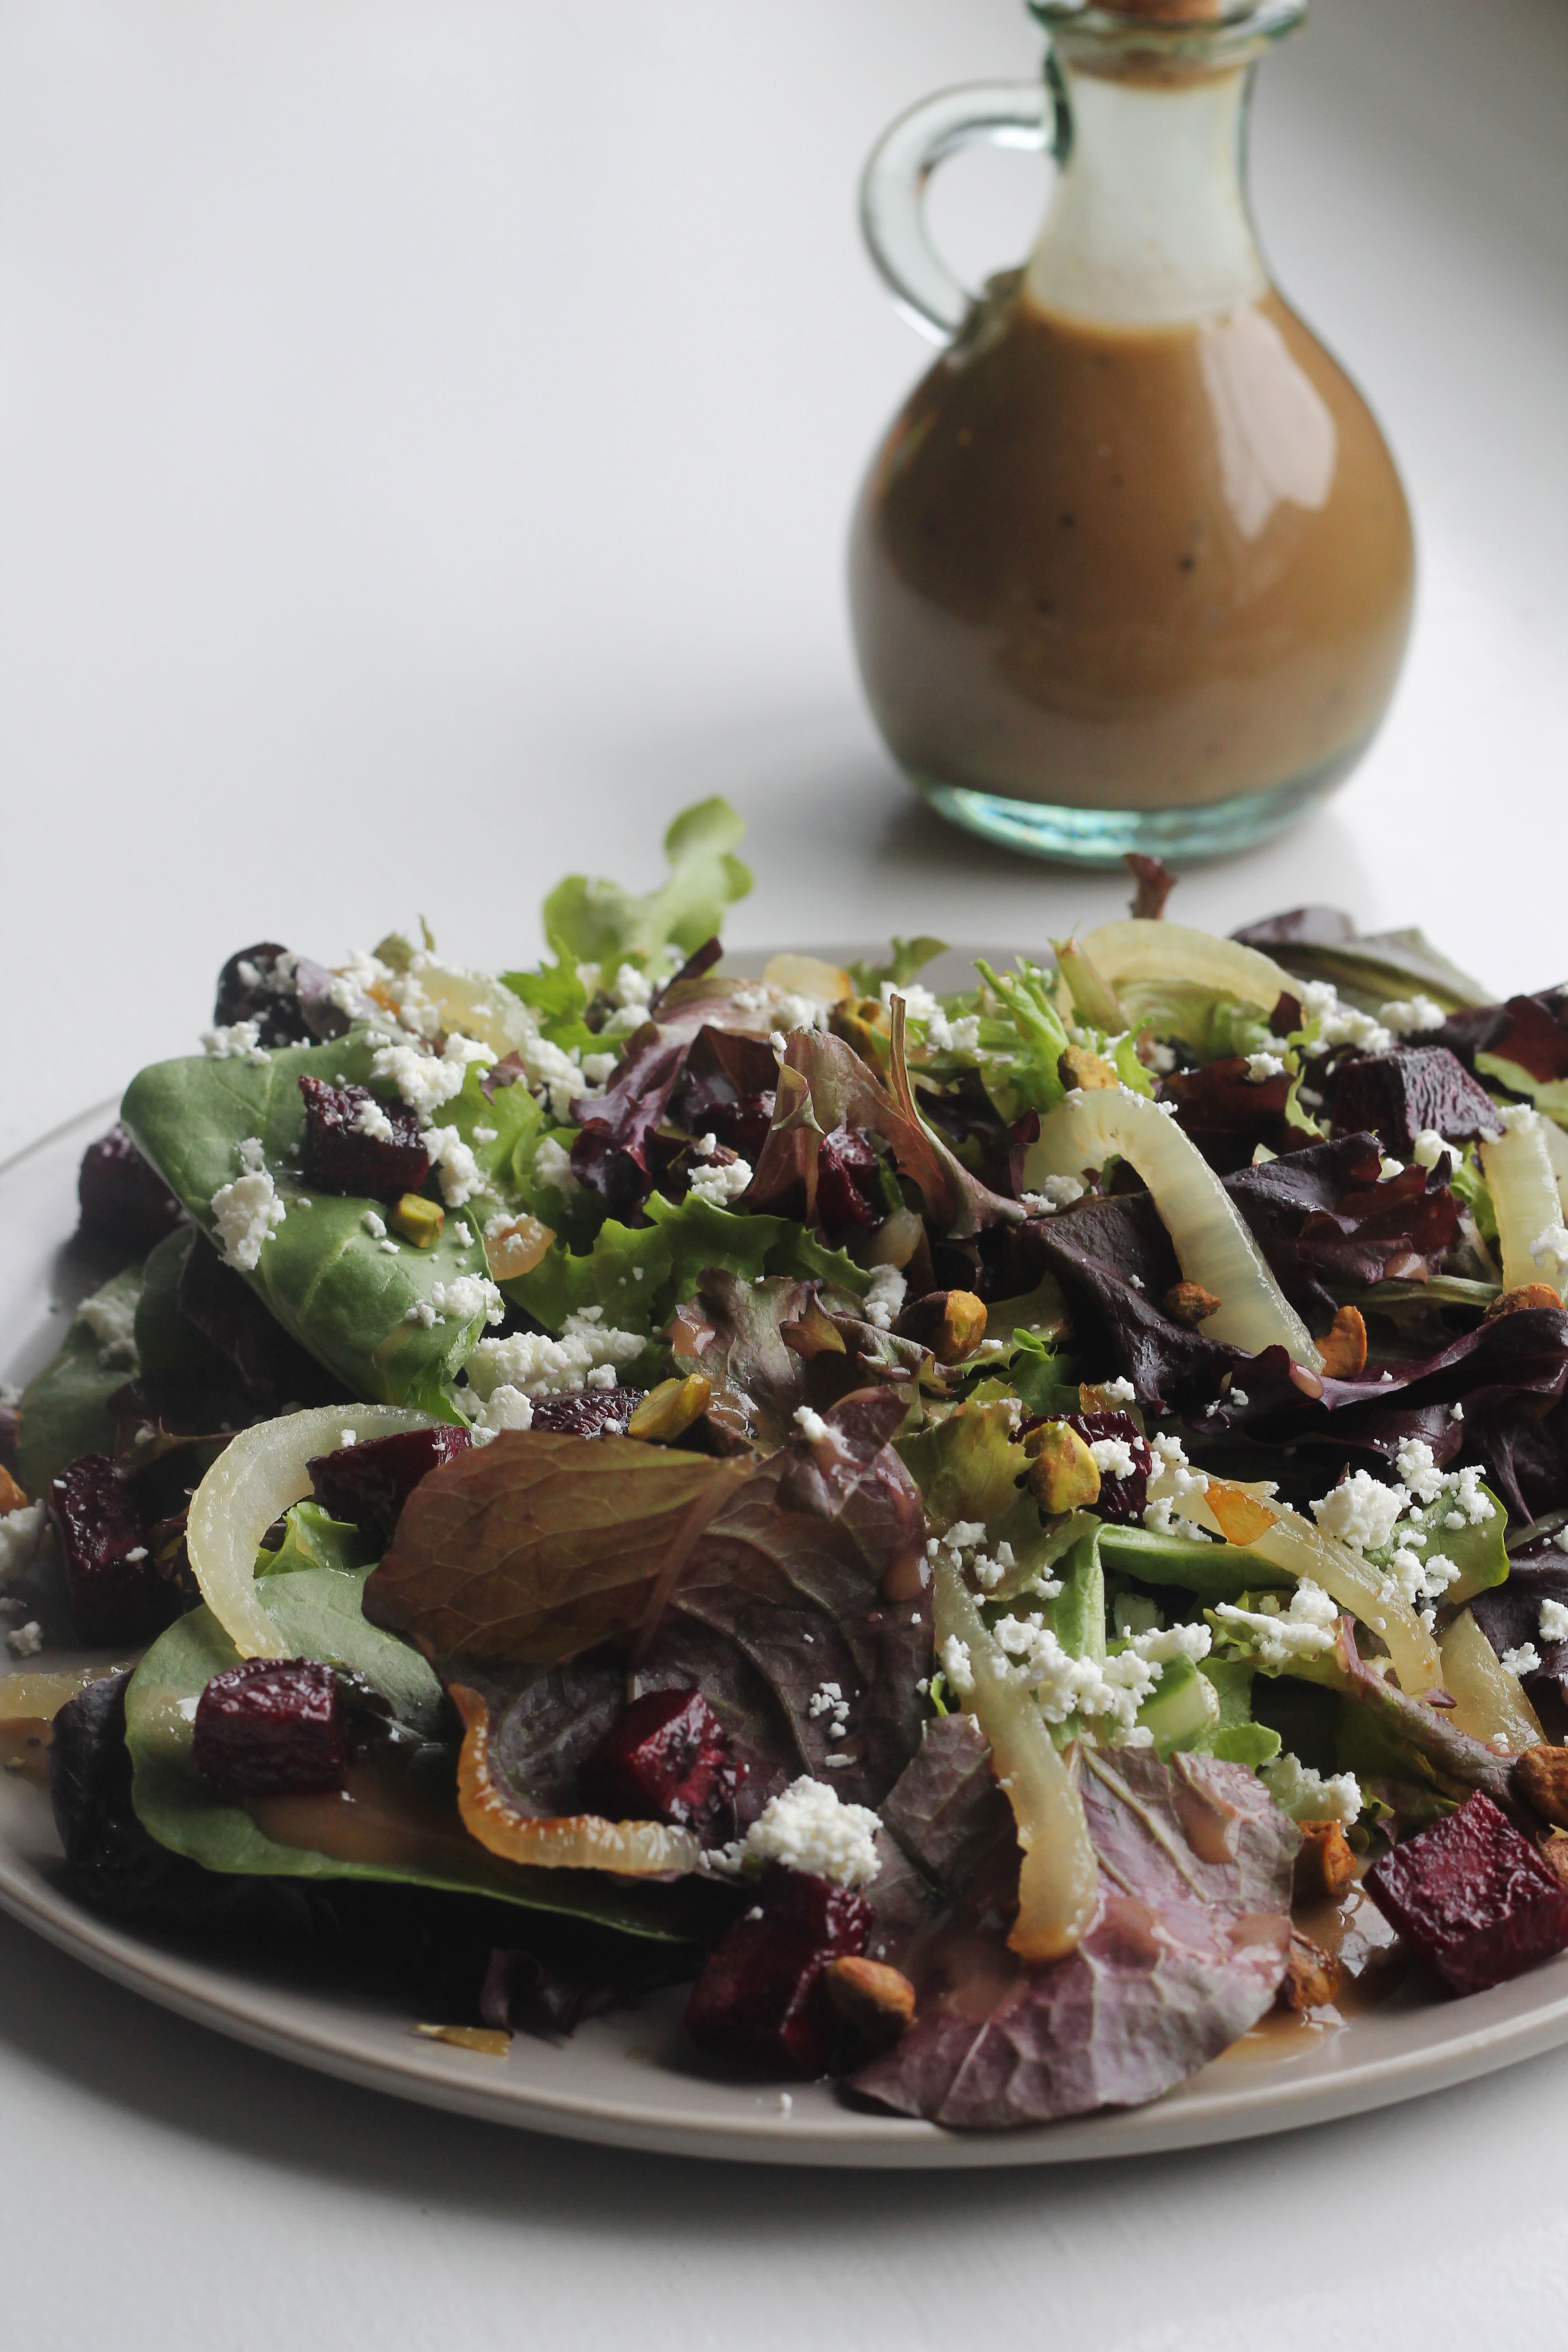 Mixed Greens with Roasted Beets, Caramelized Onions, Goat Cheese and Pistachios tossed in a creamy Balsamic Vinaigrette